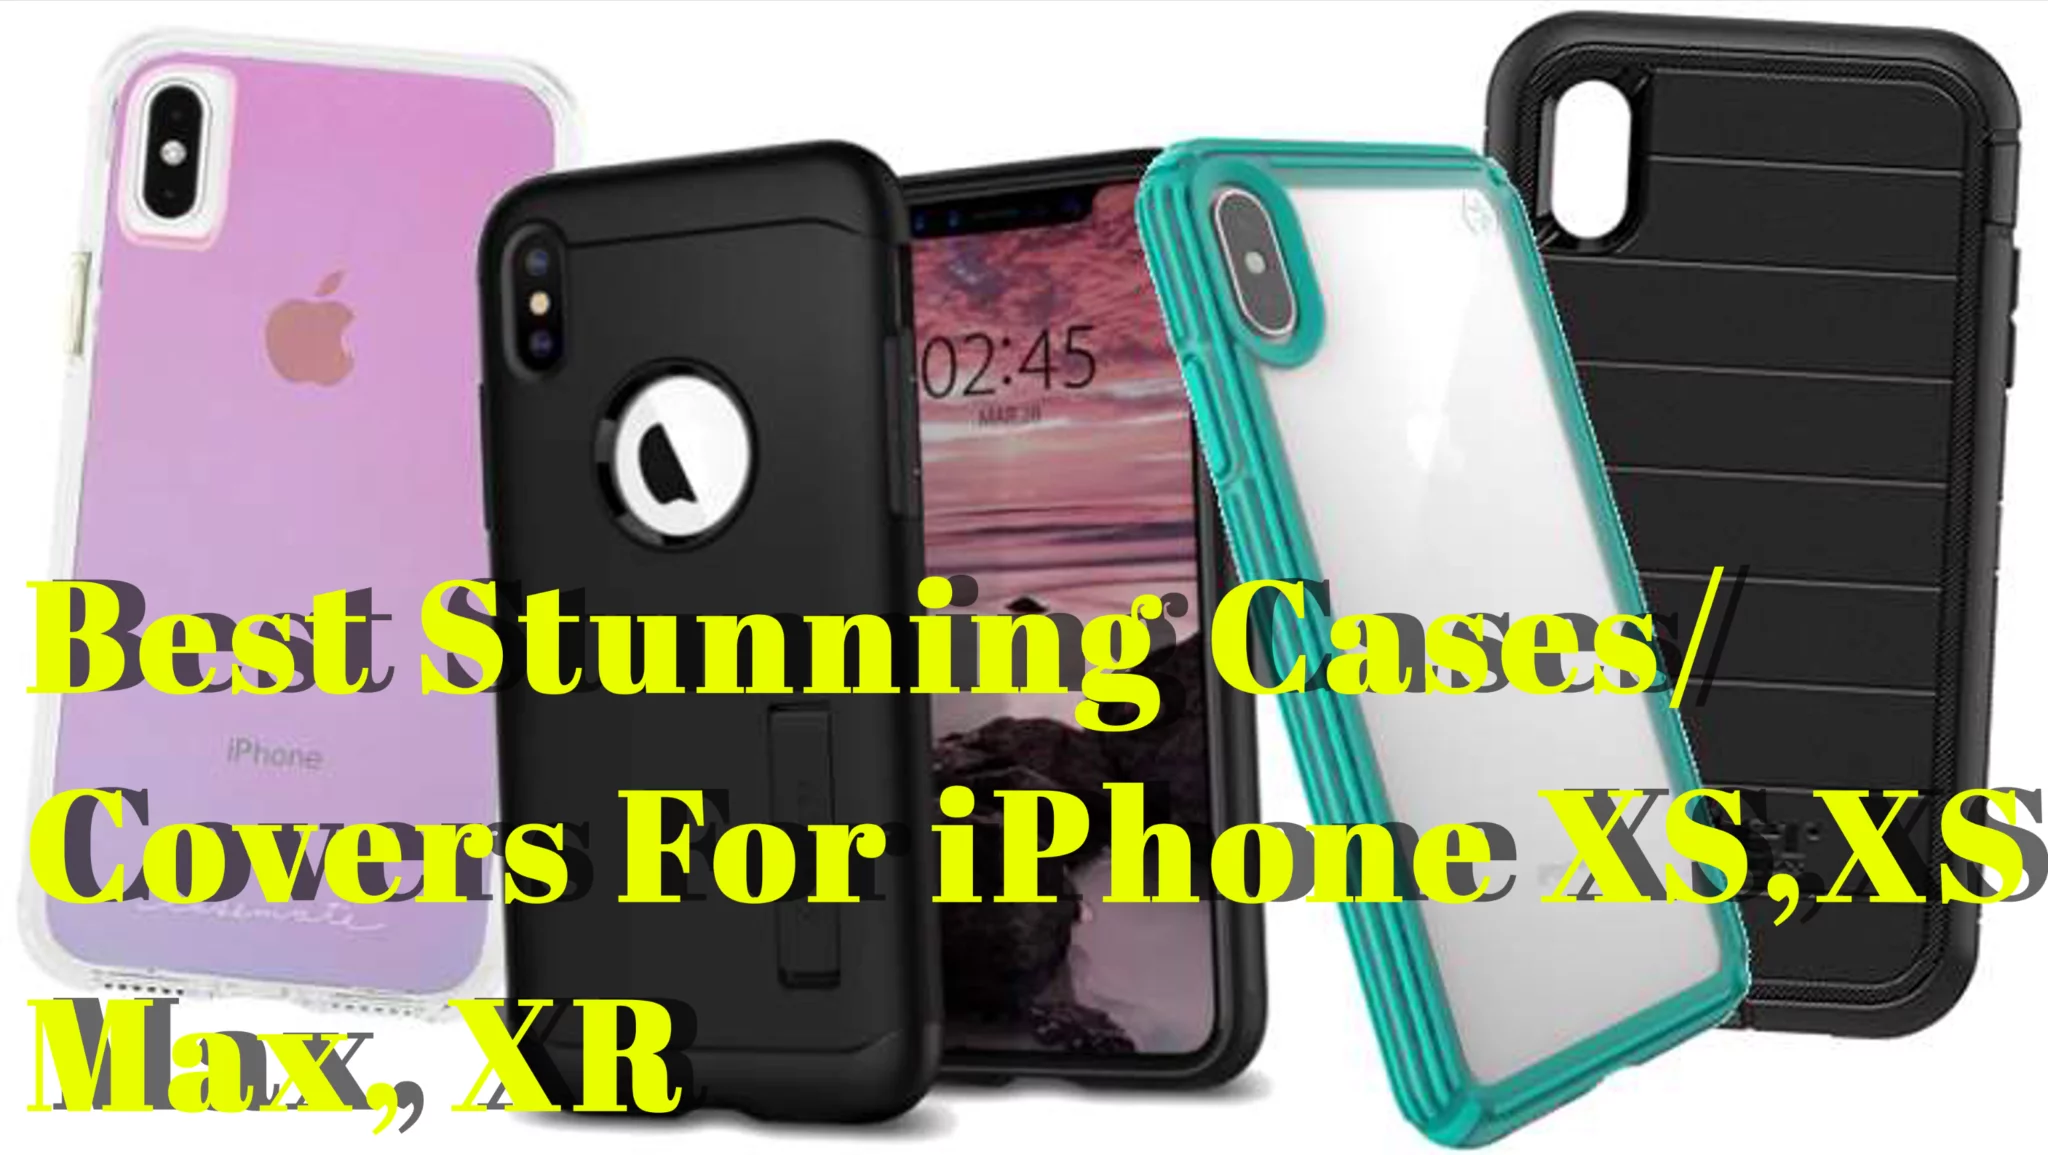 Best Stunning cases To Buy for Brand New iPhone XS XS Max XR